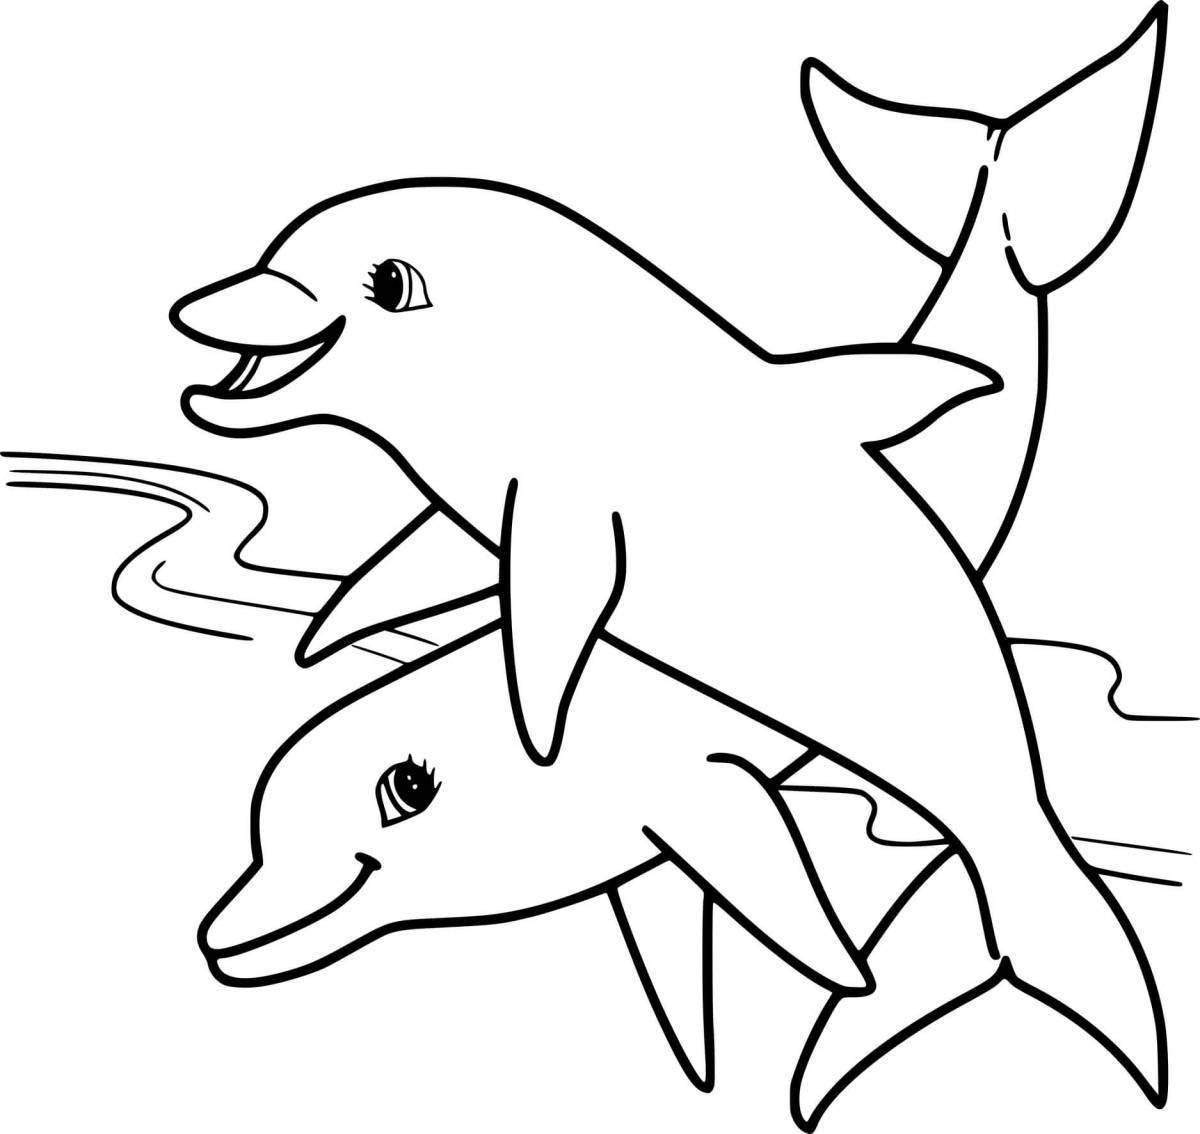 Colorful dolphin coloring page